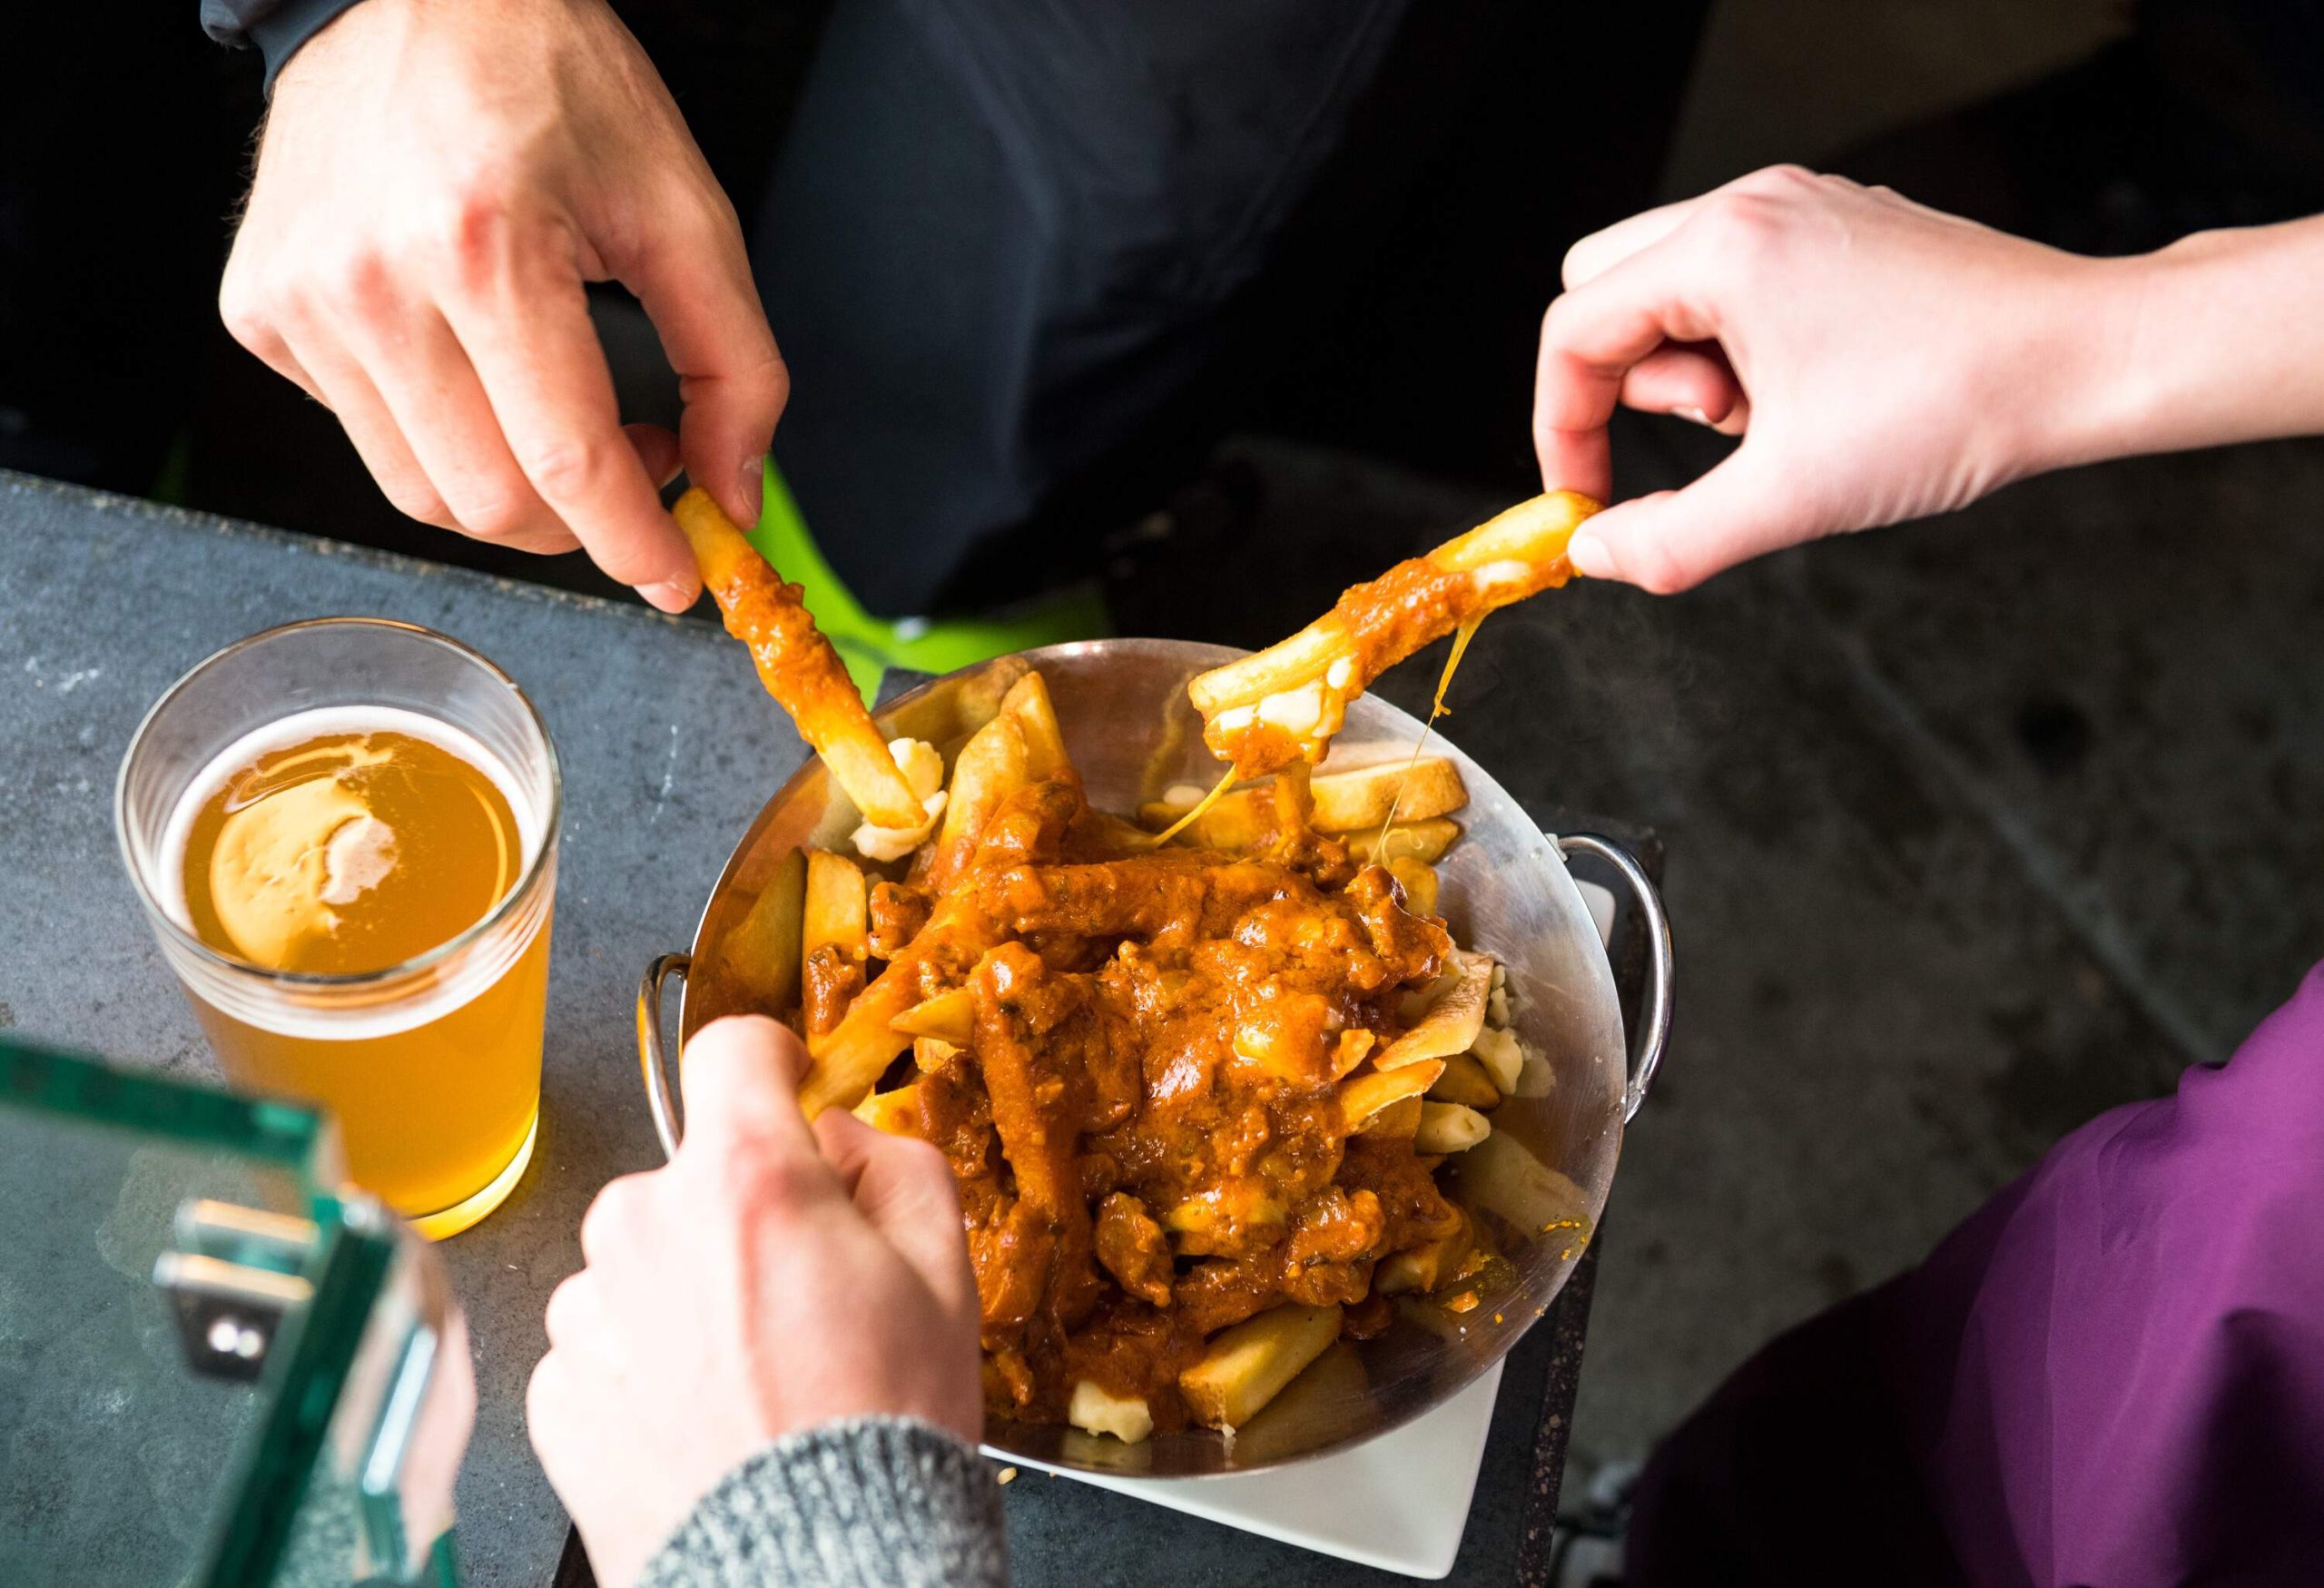 Apres ski foods. Beer and poutine at the bar. Savoury pub foods.